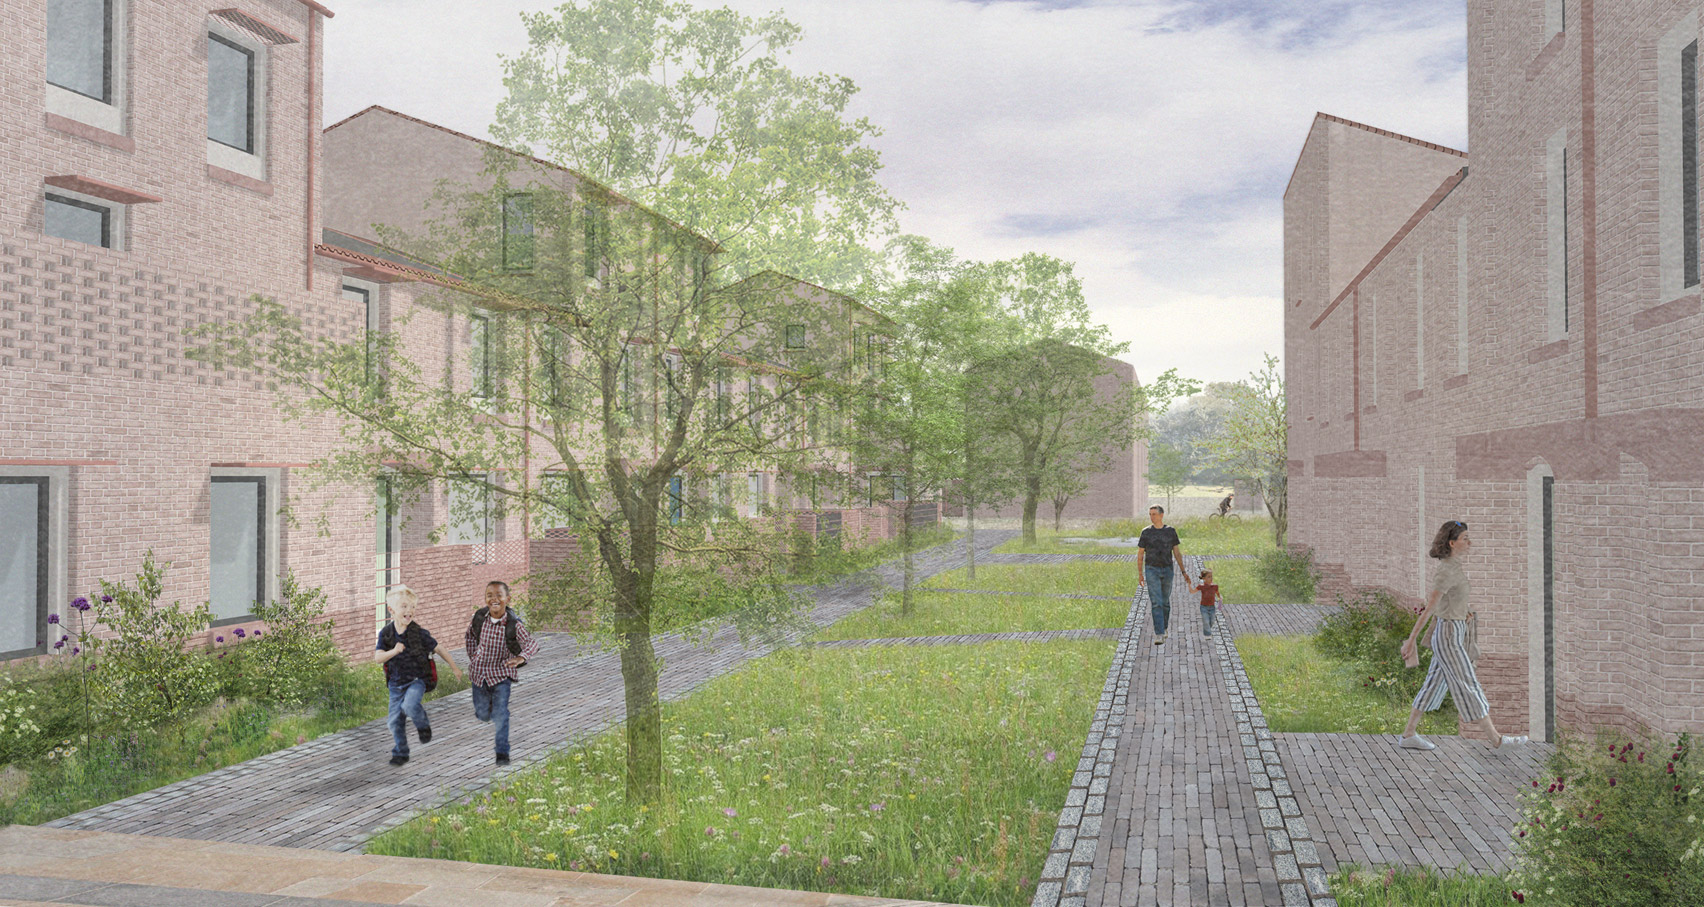 A visual of shared green space between housing in Mikhail Riches' Housing Delivery Programme for the City of York